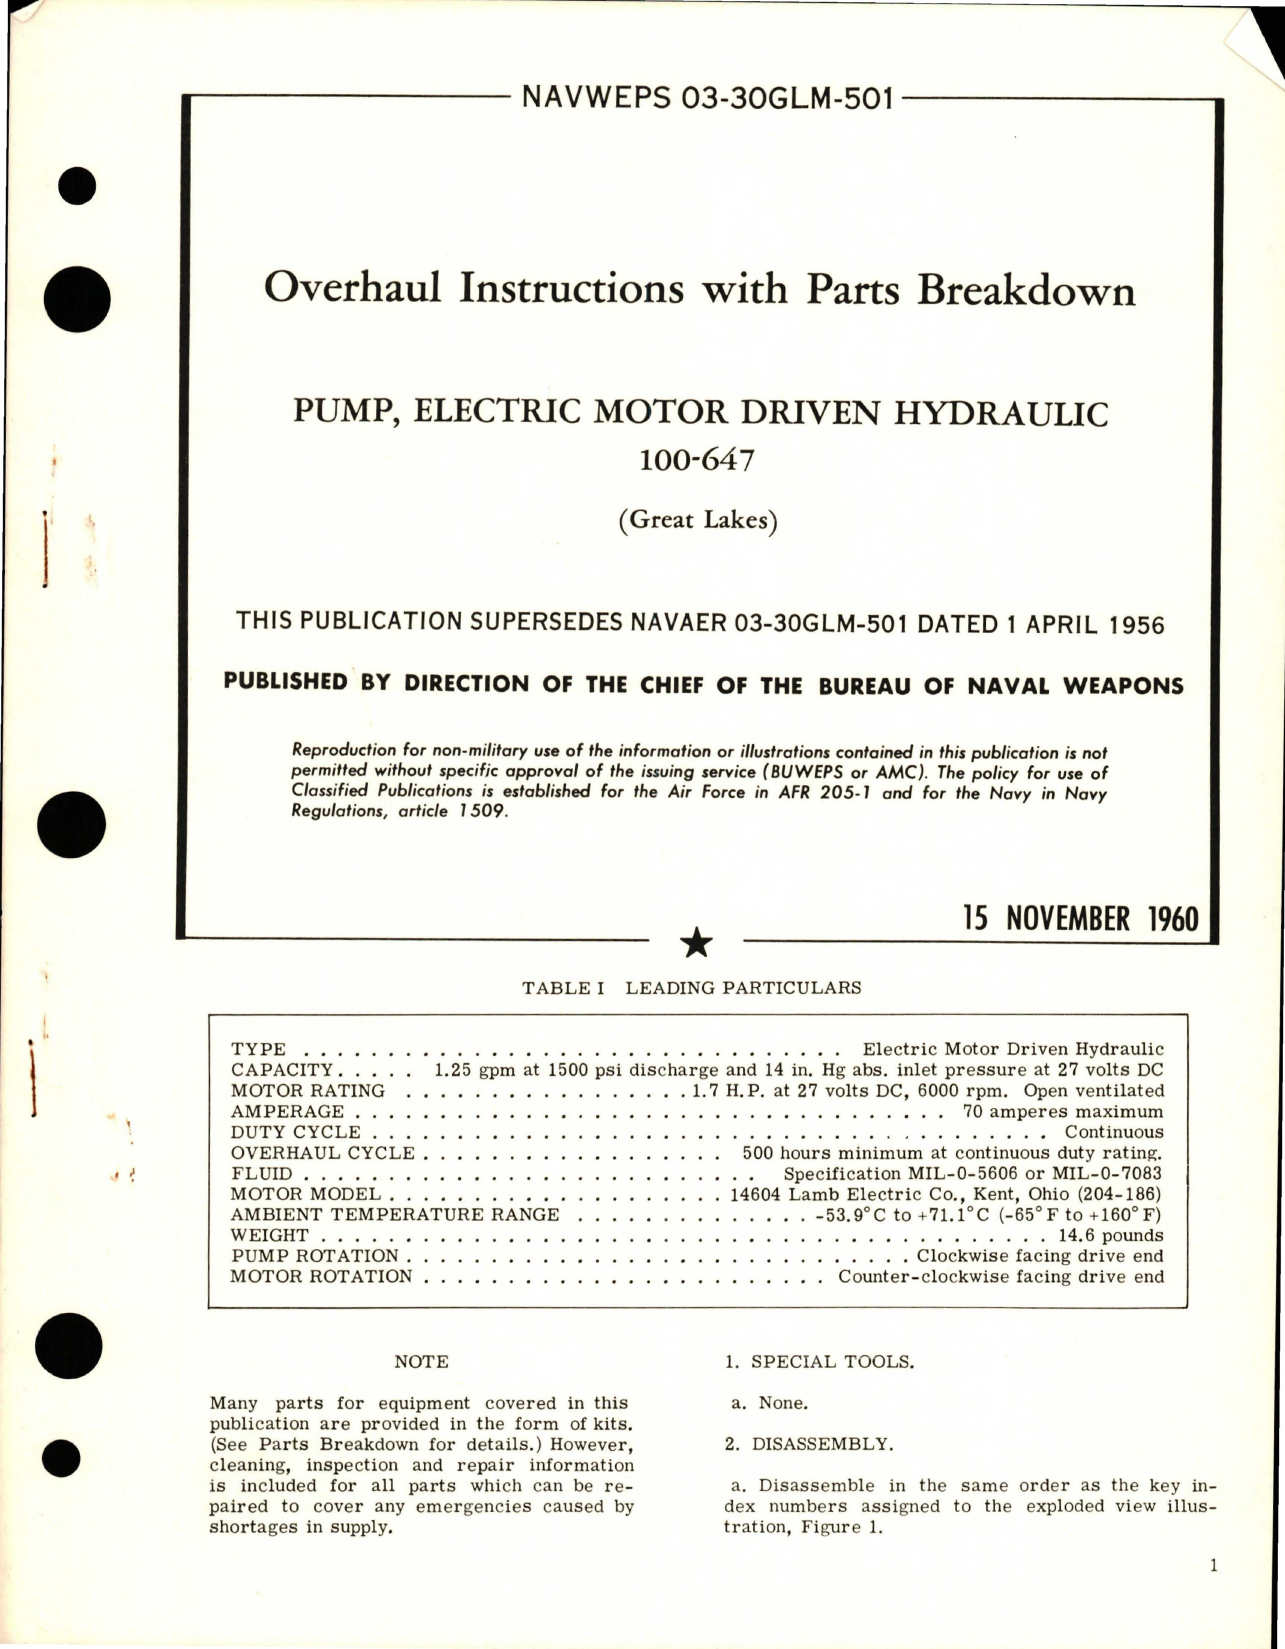 Sample page 1 from AirCorps Library document: Overhaul Instructions with Parts Breakdown for Electric Motor Driven Hydraulic Pump - 100-647 